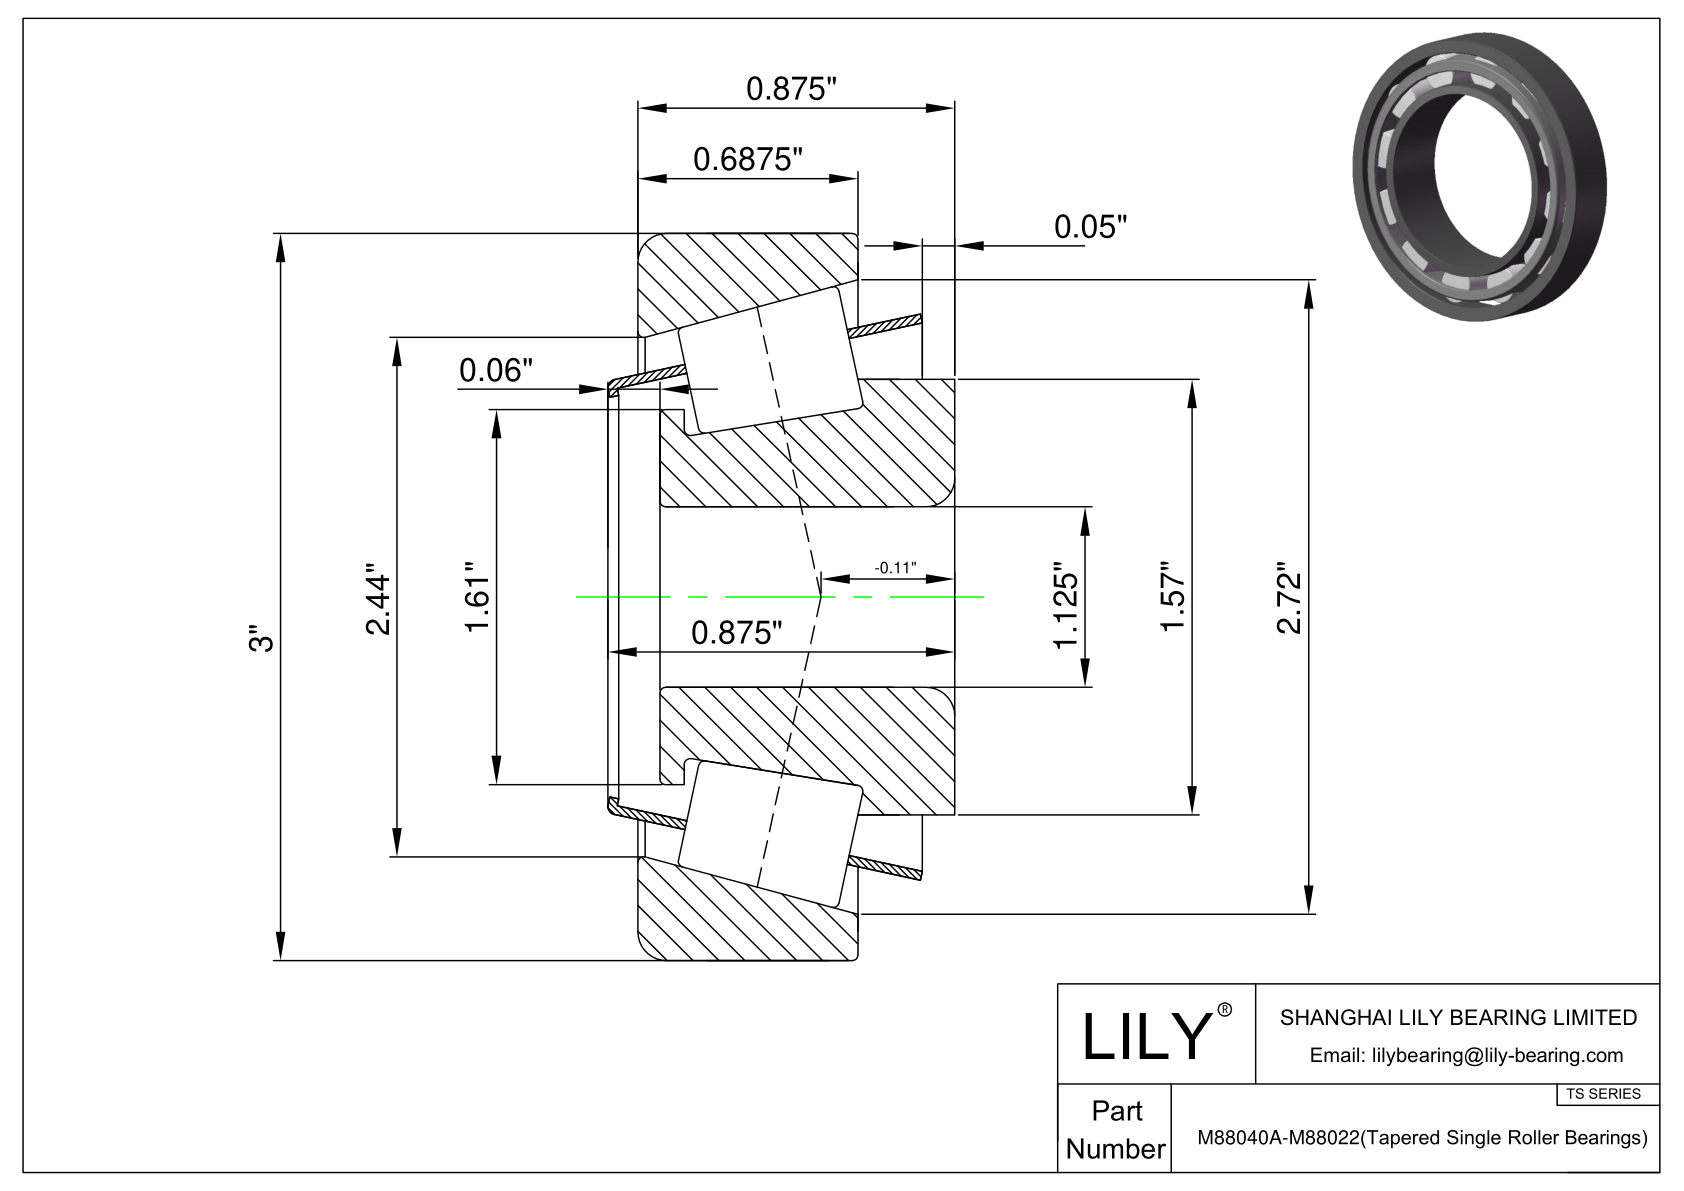 M88040A-M88022 TS (Tapered Single Roller Bearings) (Imperial) cad drawing